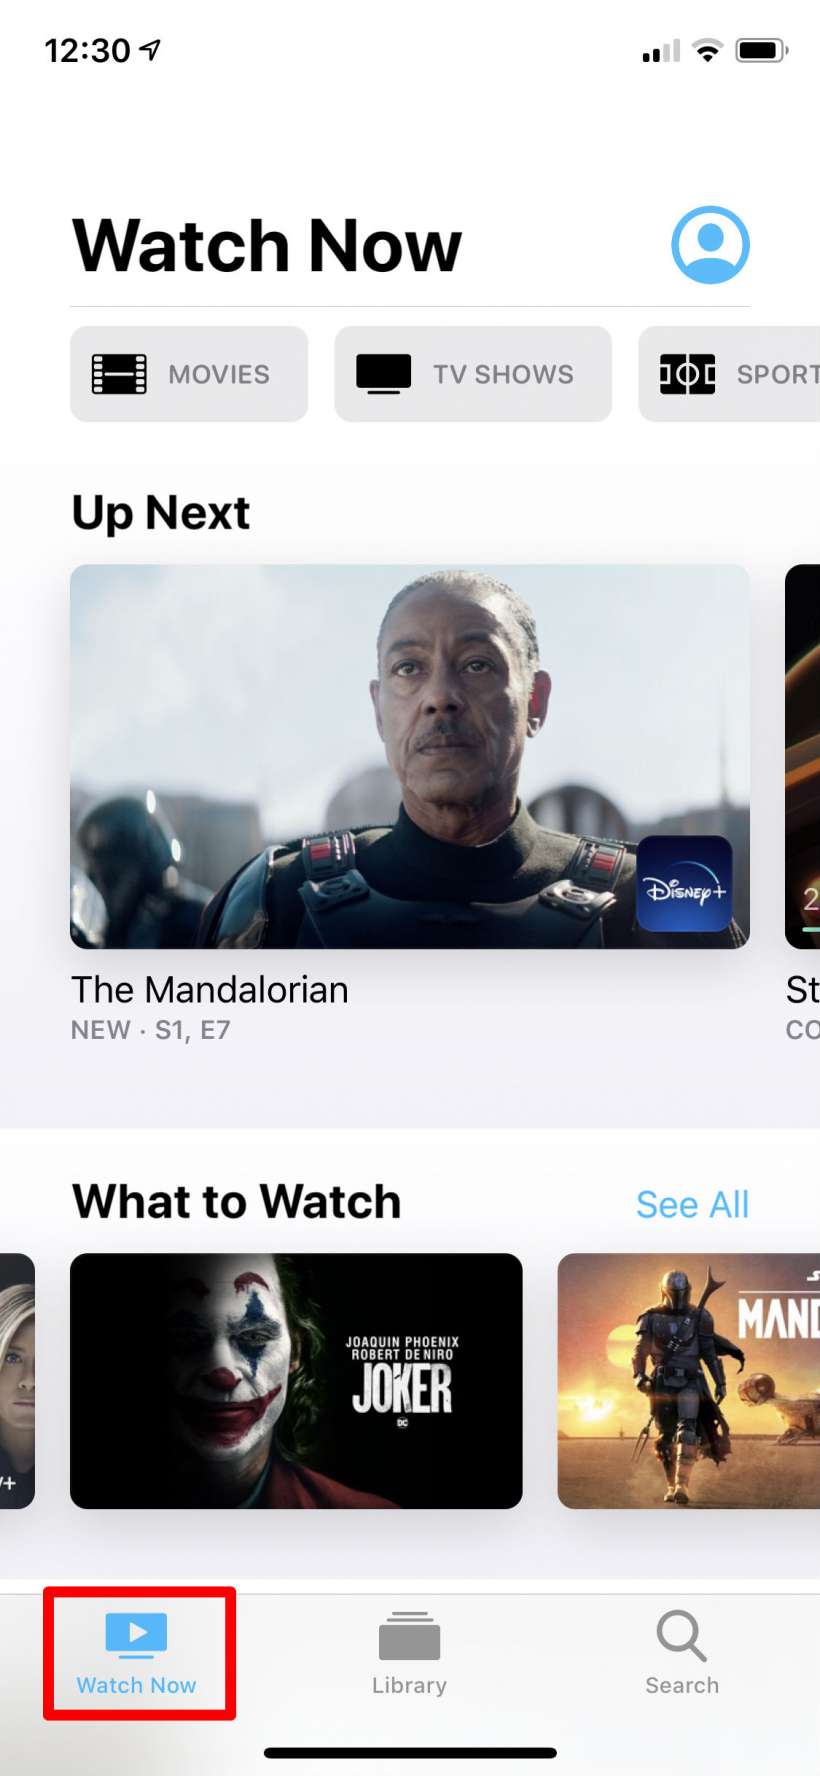 How to remove shows and movies from Up Next in Apple TV app on iPhone, iPad, Mac and Apple TV.